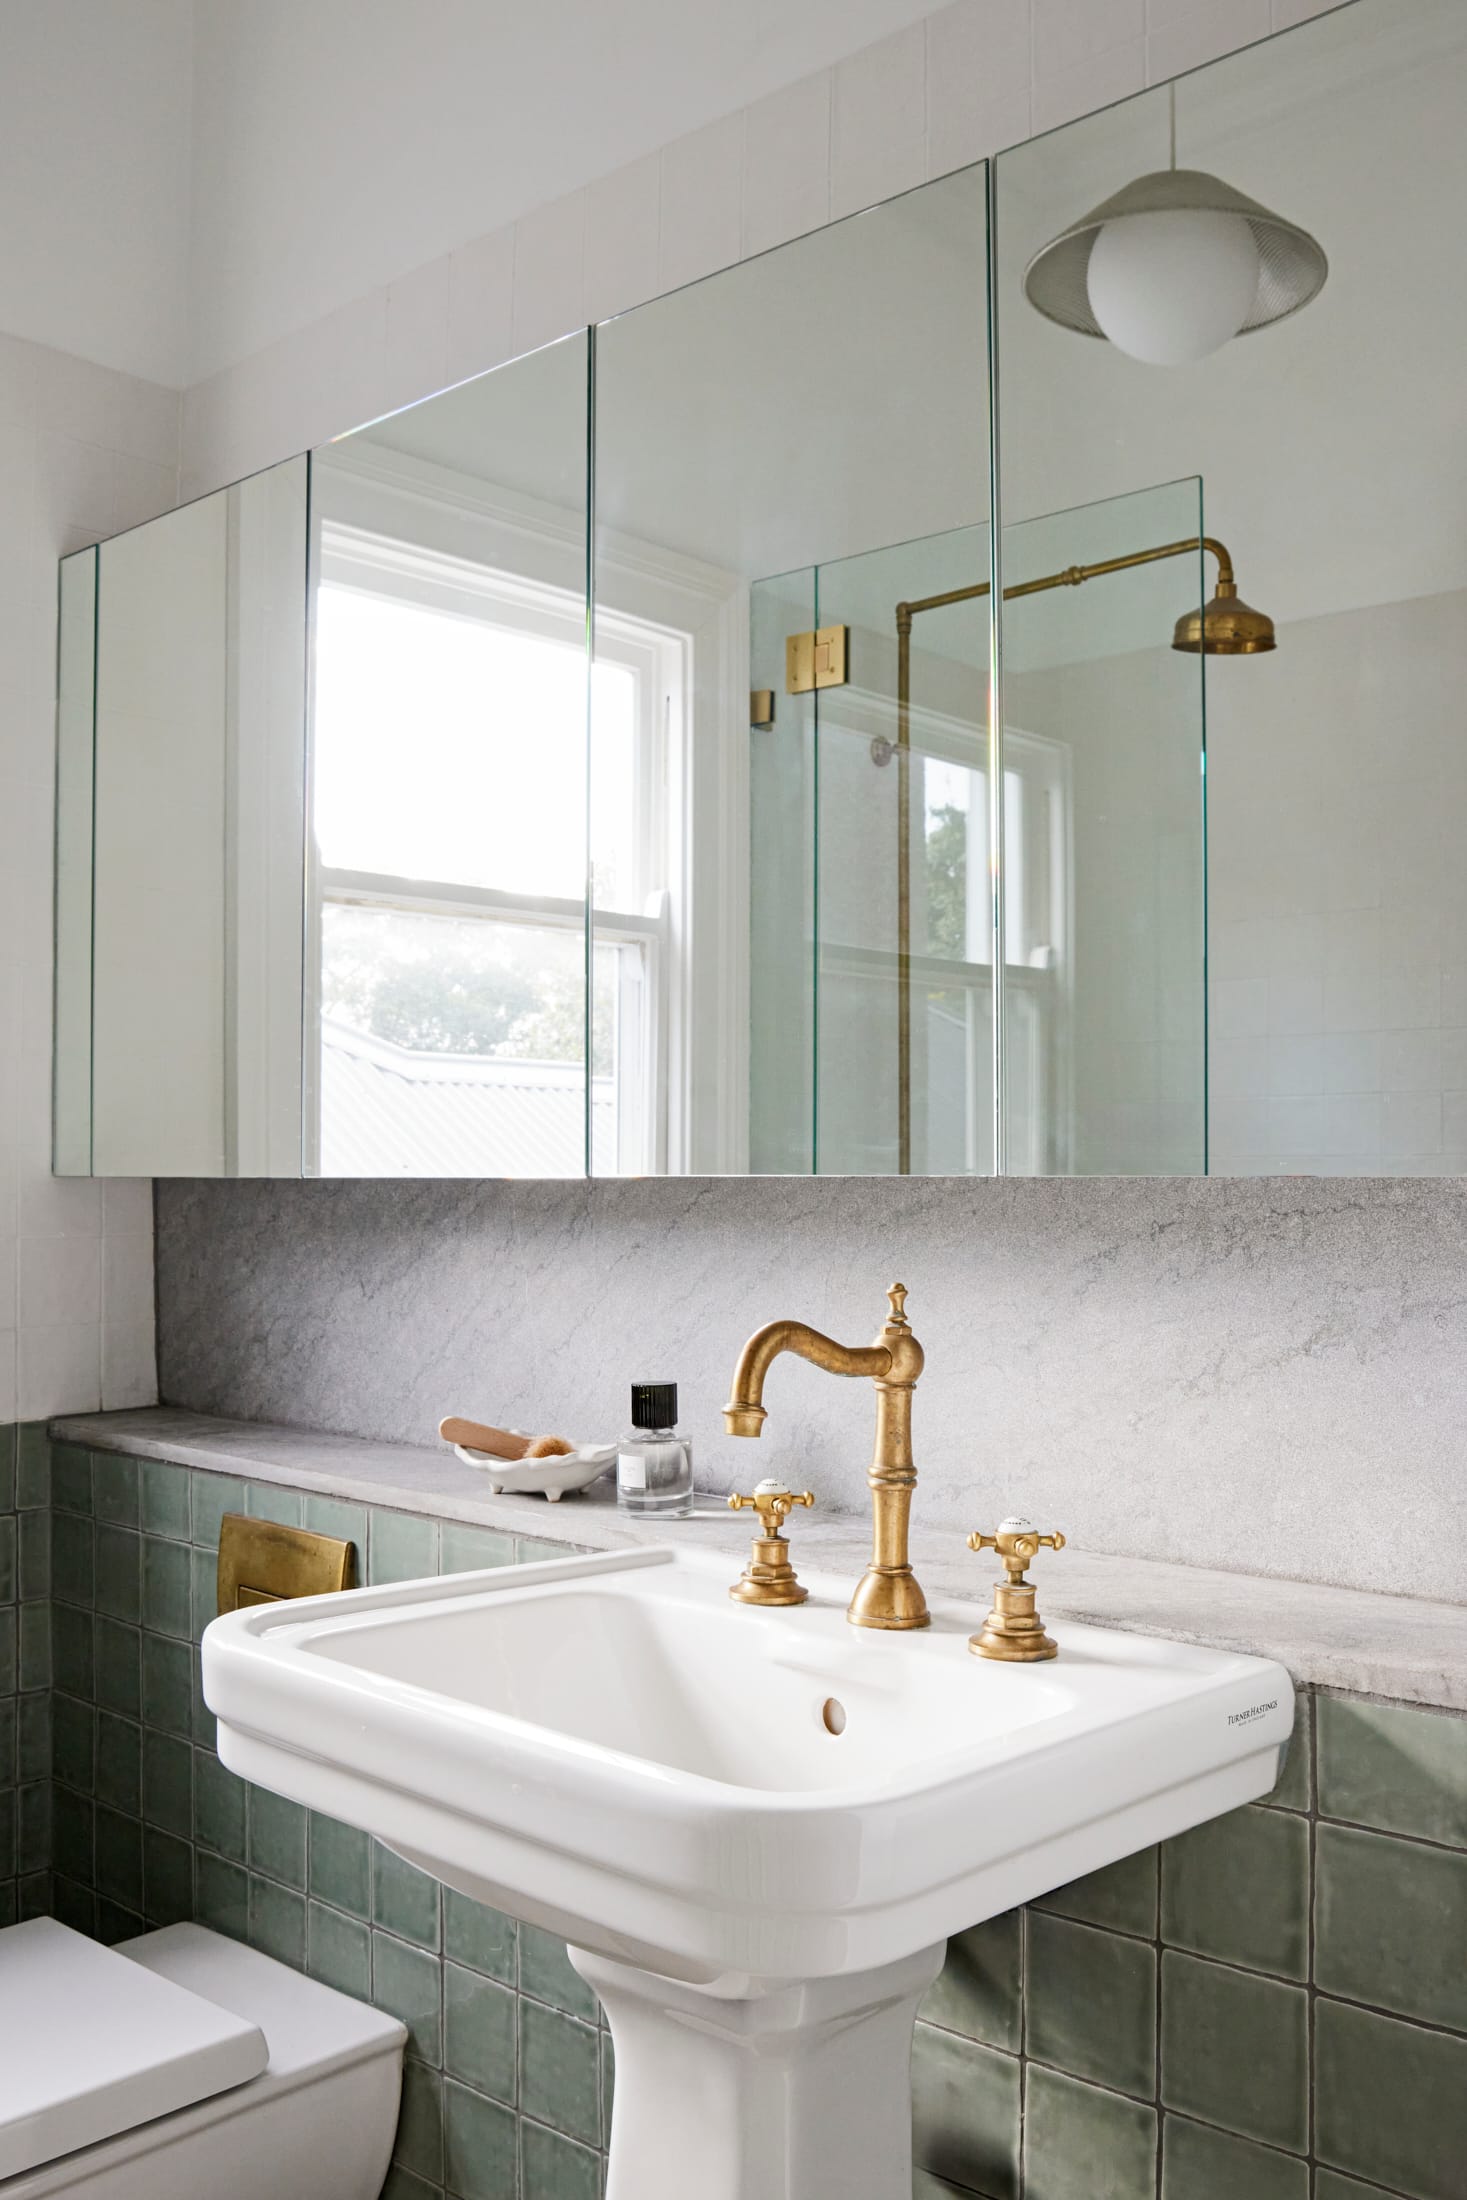 Drummoyne House by studio BARBARA. Photography by Jacqui Turk. Vintage sink in bathroom with gold fixtures and green wall tiles. Overhead wall mirrors and marble splashback.